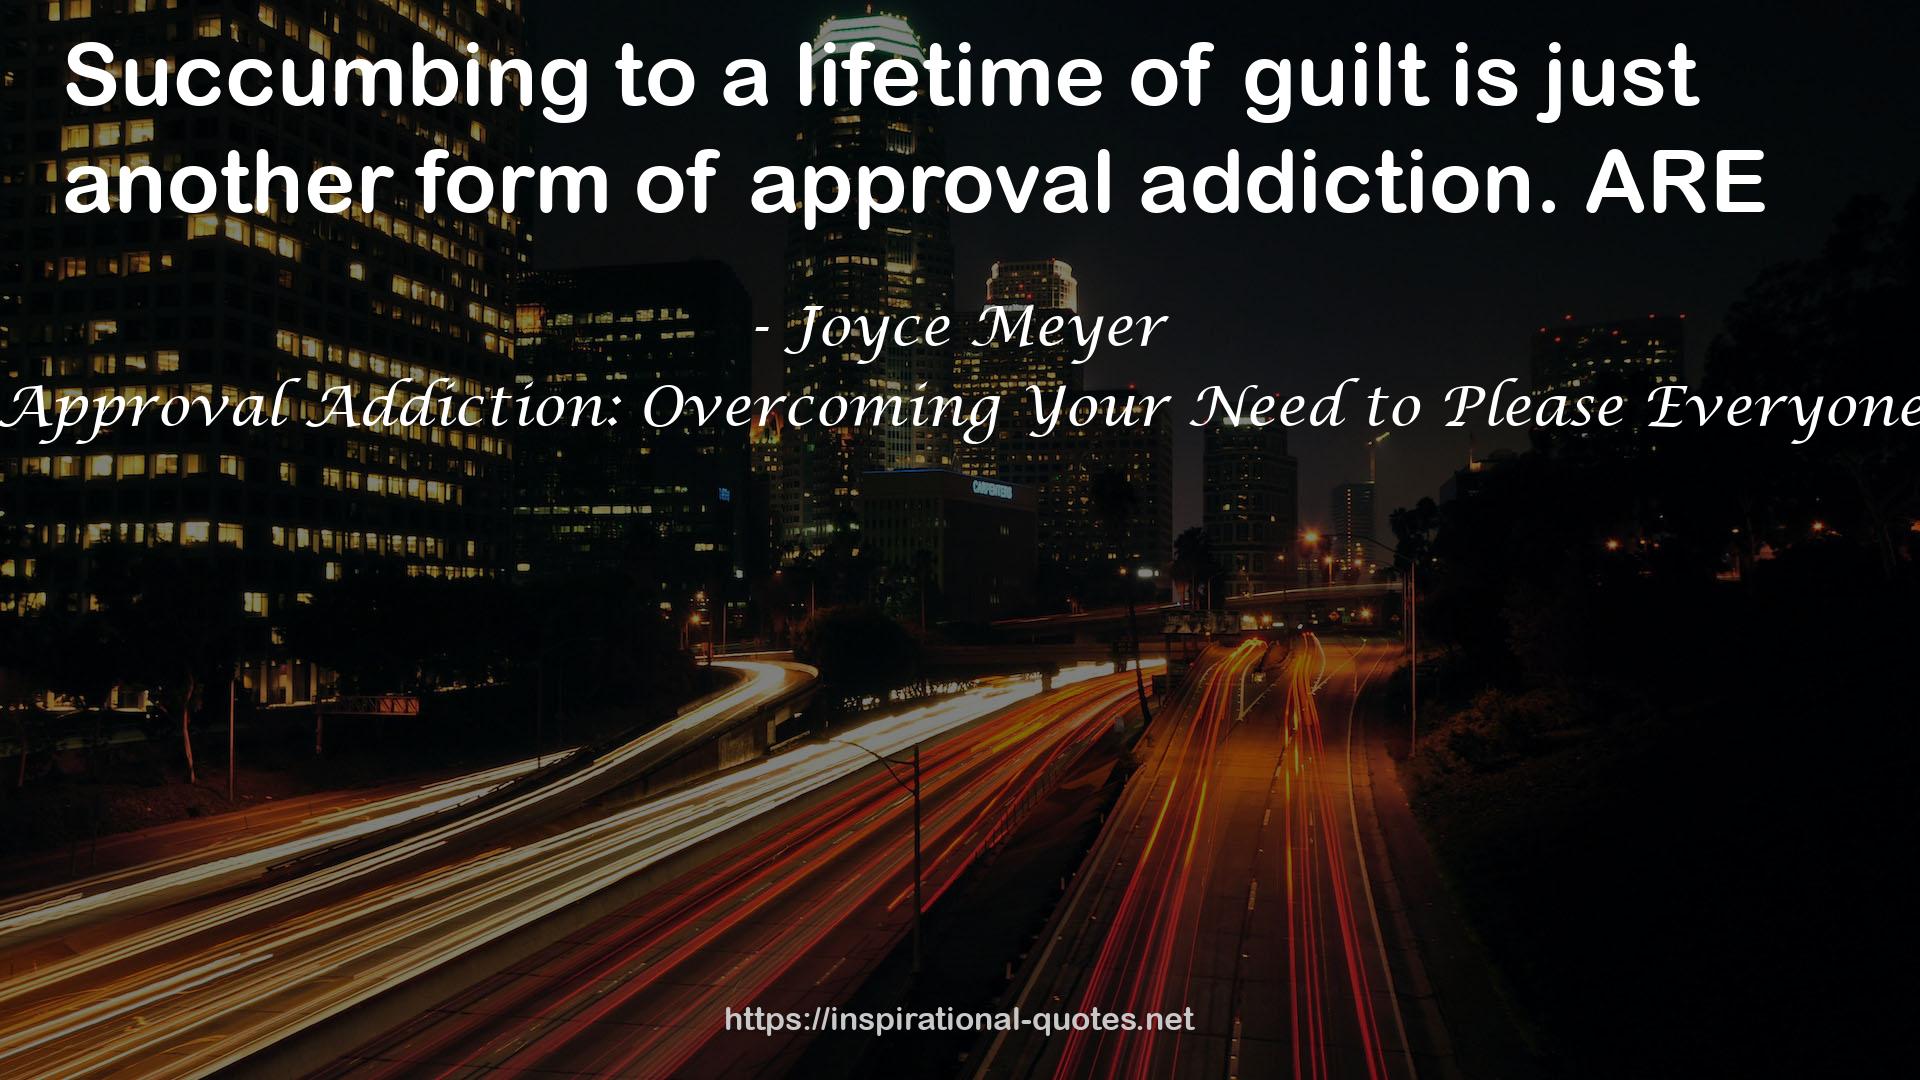 Approval Addiction: Overcoming Your Need to Please Everyone QUOTES